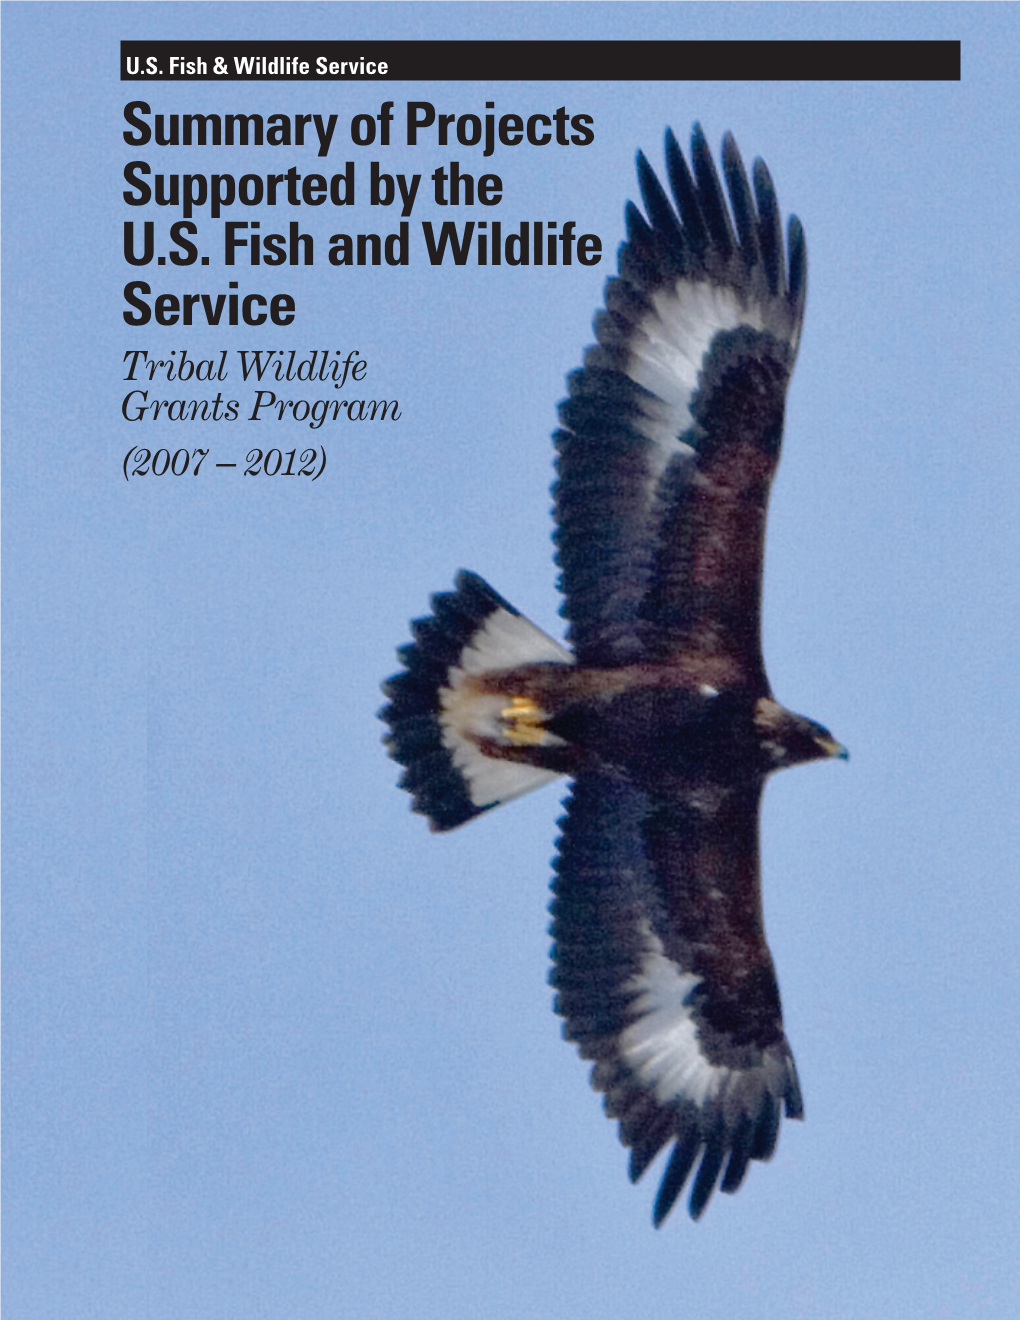 Summary of Projects Supported by the U.S. Fish and Wildlife Service Tribal Wildlife Grants Program (2007 – 2012)